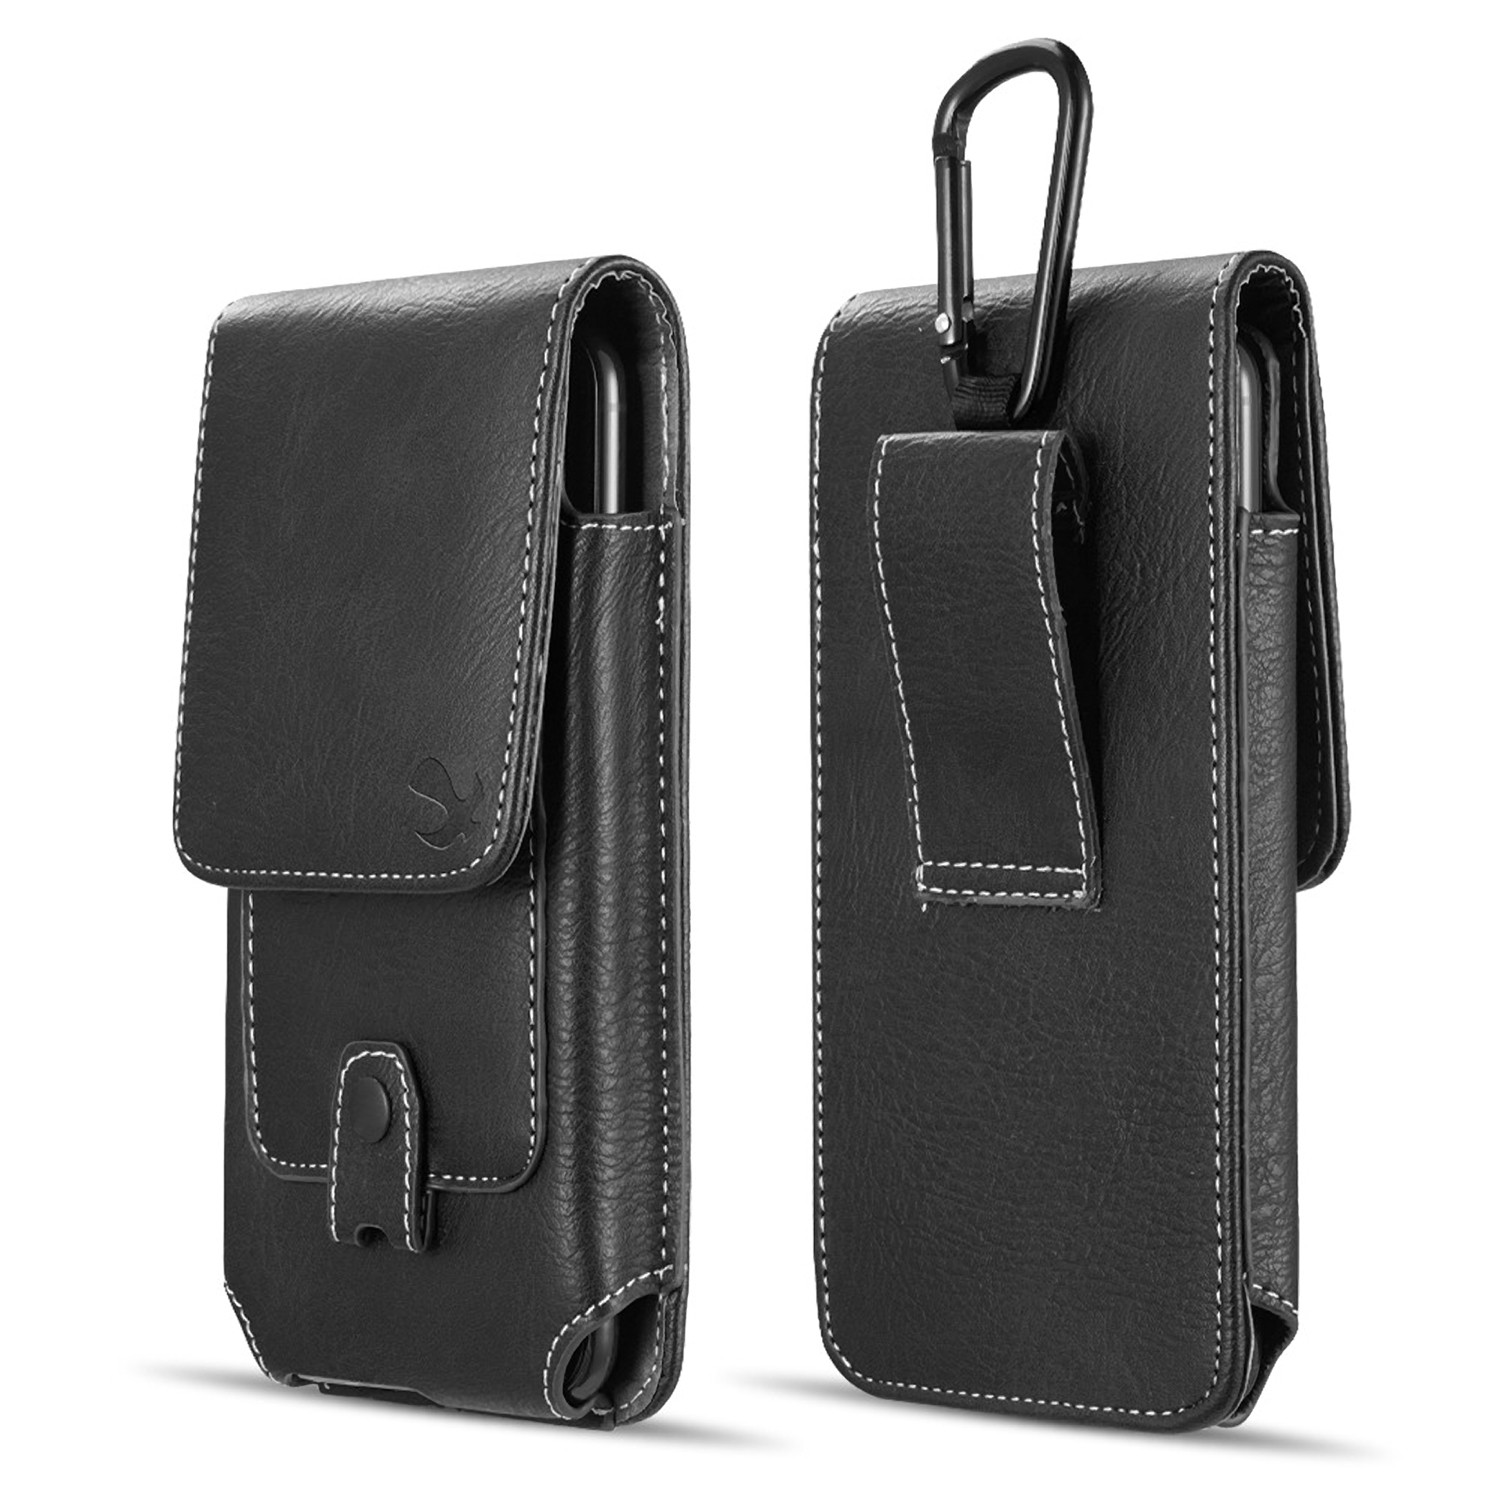 No. 27 For Iphone X/Iphone 4.7/Htc One M7 Vertical Universal Leather Pouch - image 1 of 1